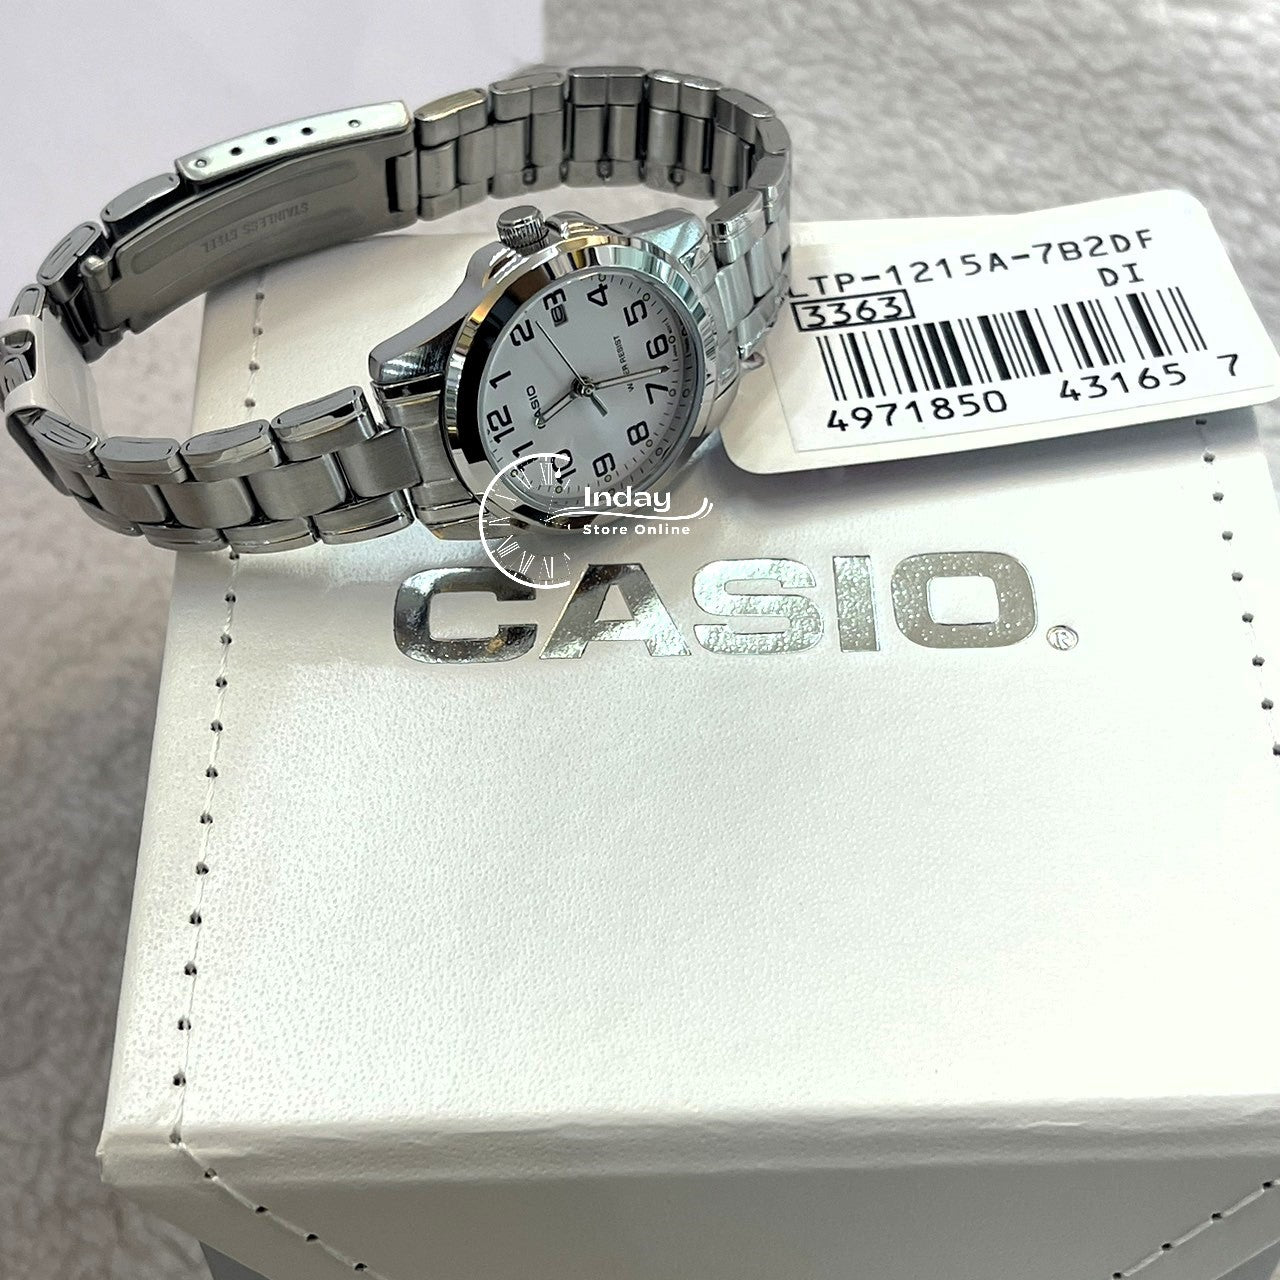 Casio Fashion Women's Watch LTP-1215A-7B2 Silver Stainless Steel Band